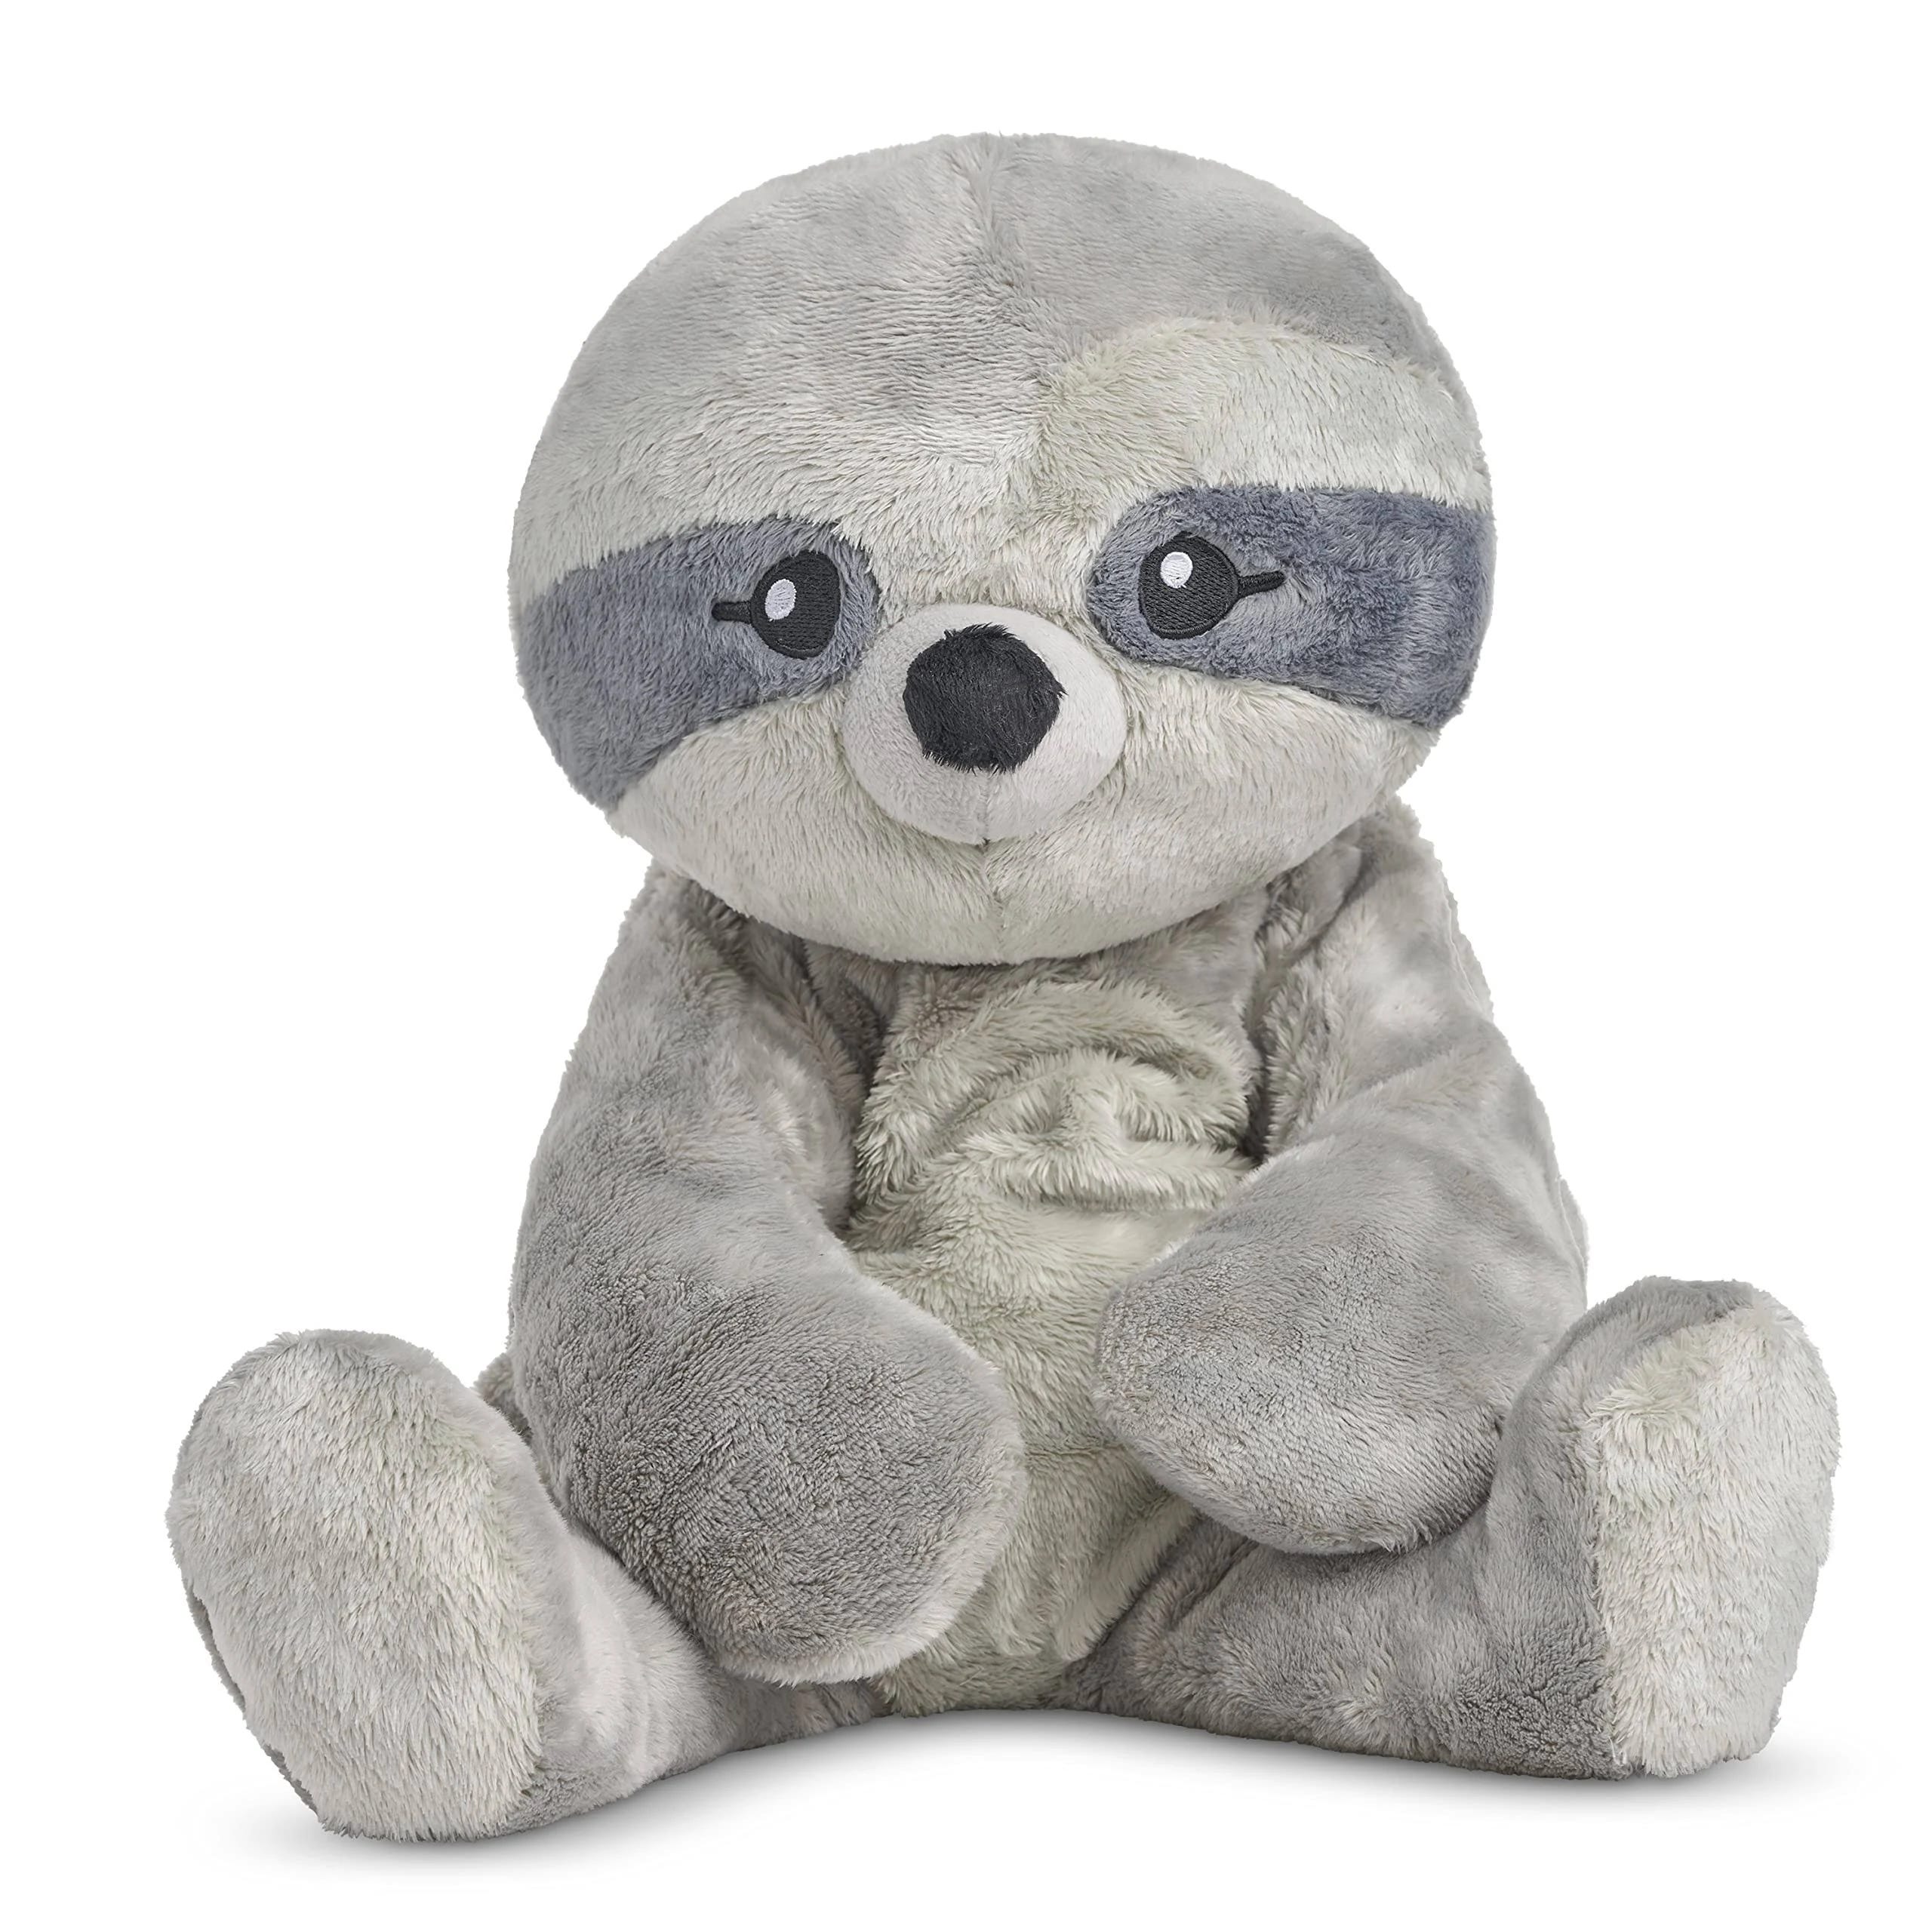 Weighted Sloth Plush: Emotional Support Toy for Stress Relief | Image